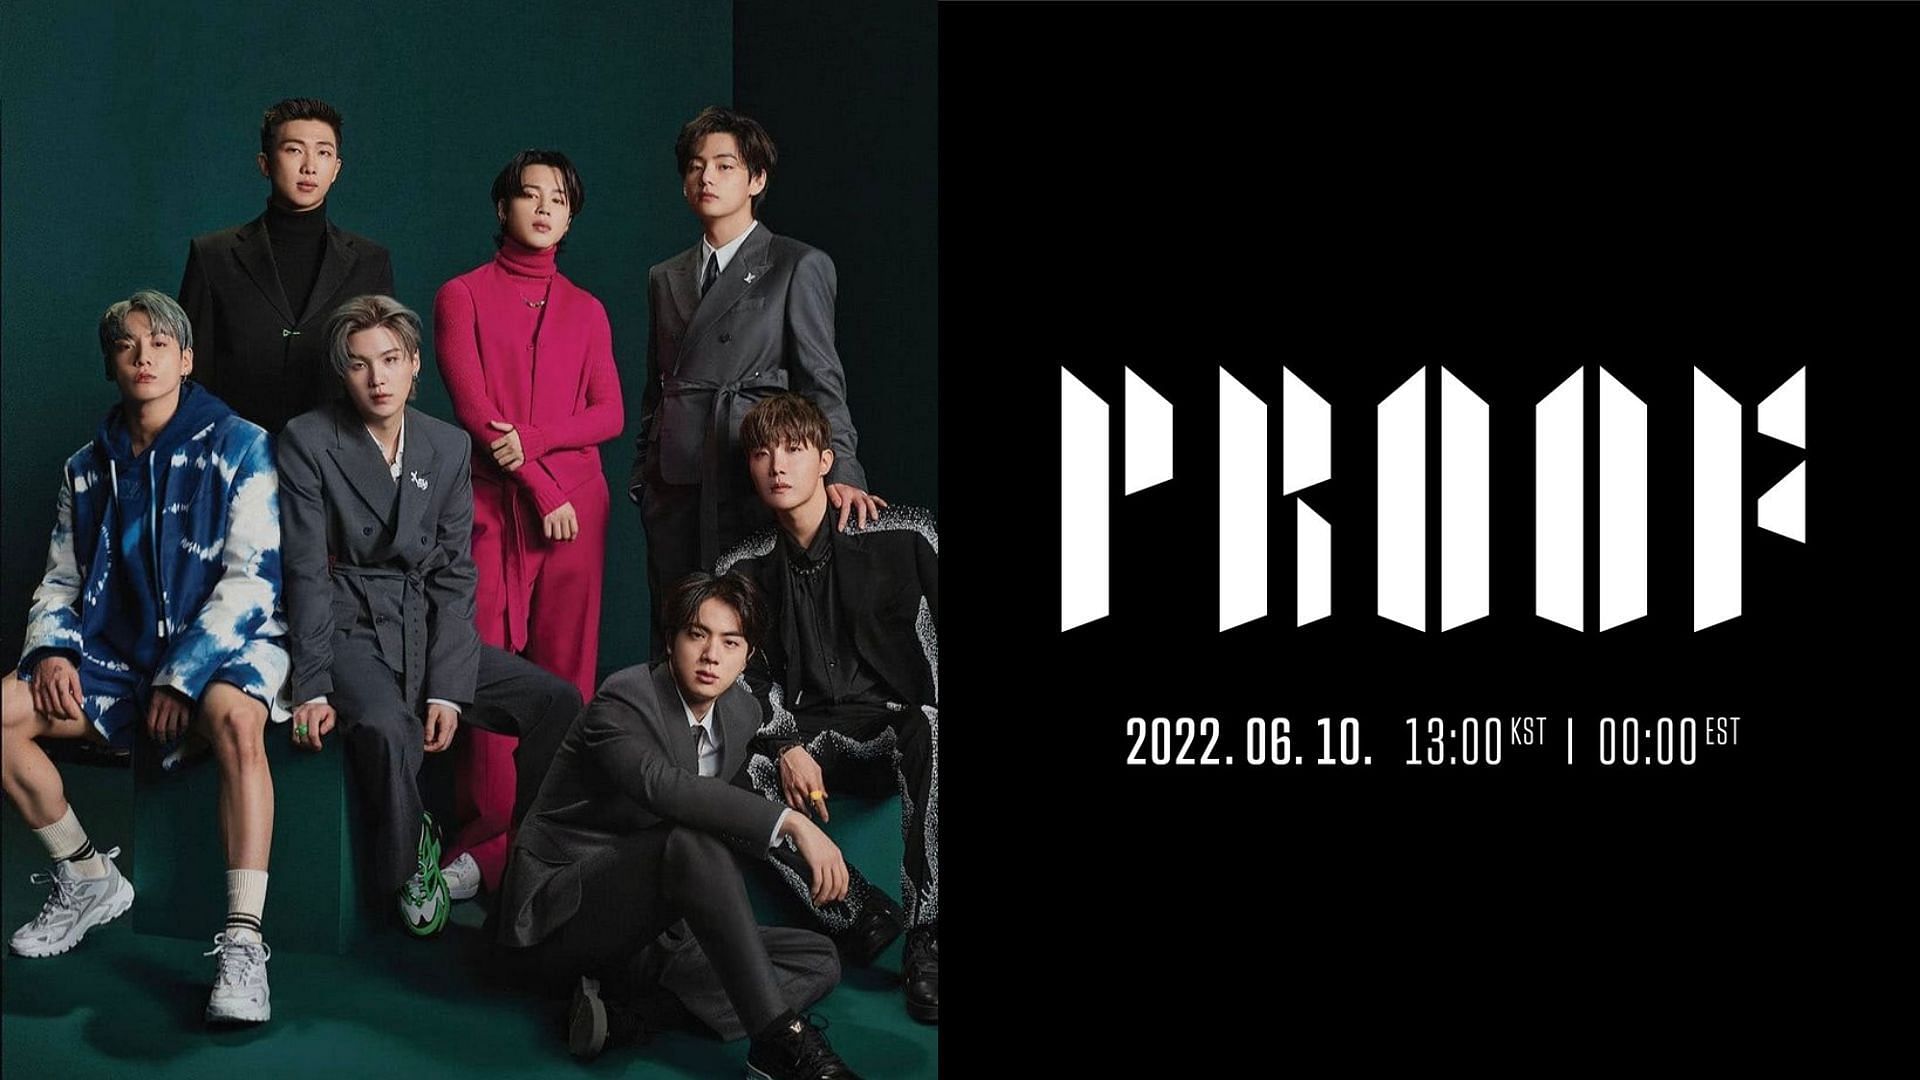 Netizens express mixed feelings about BTS's album 'Proof' including song produced